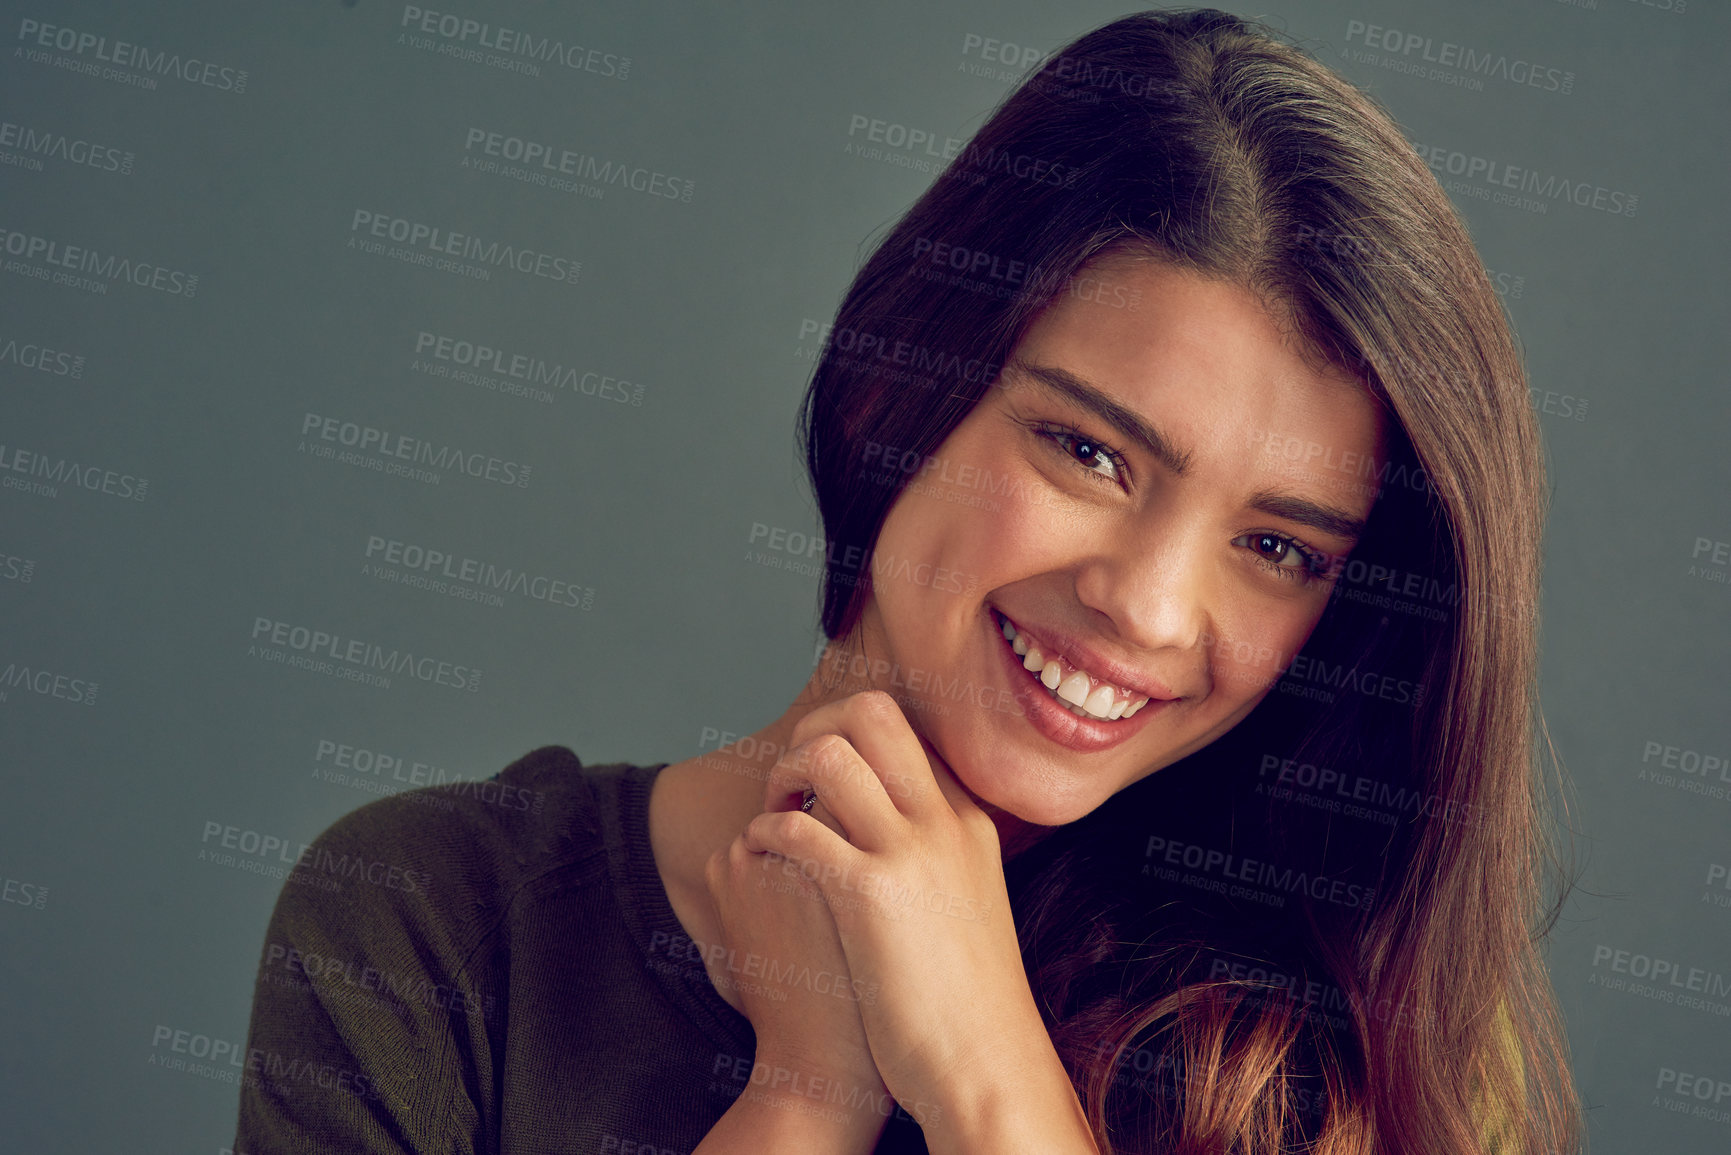 Buy stock photo Studio shot of an attractive and cheerful young woman posing against a gray background while looking into the camera